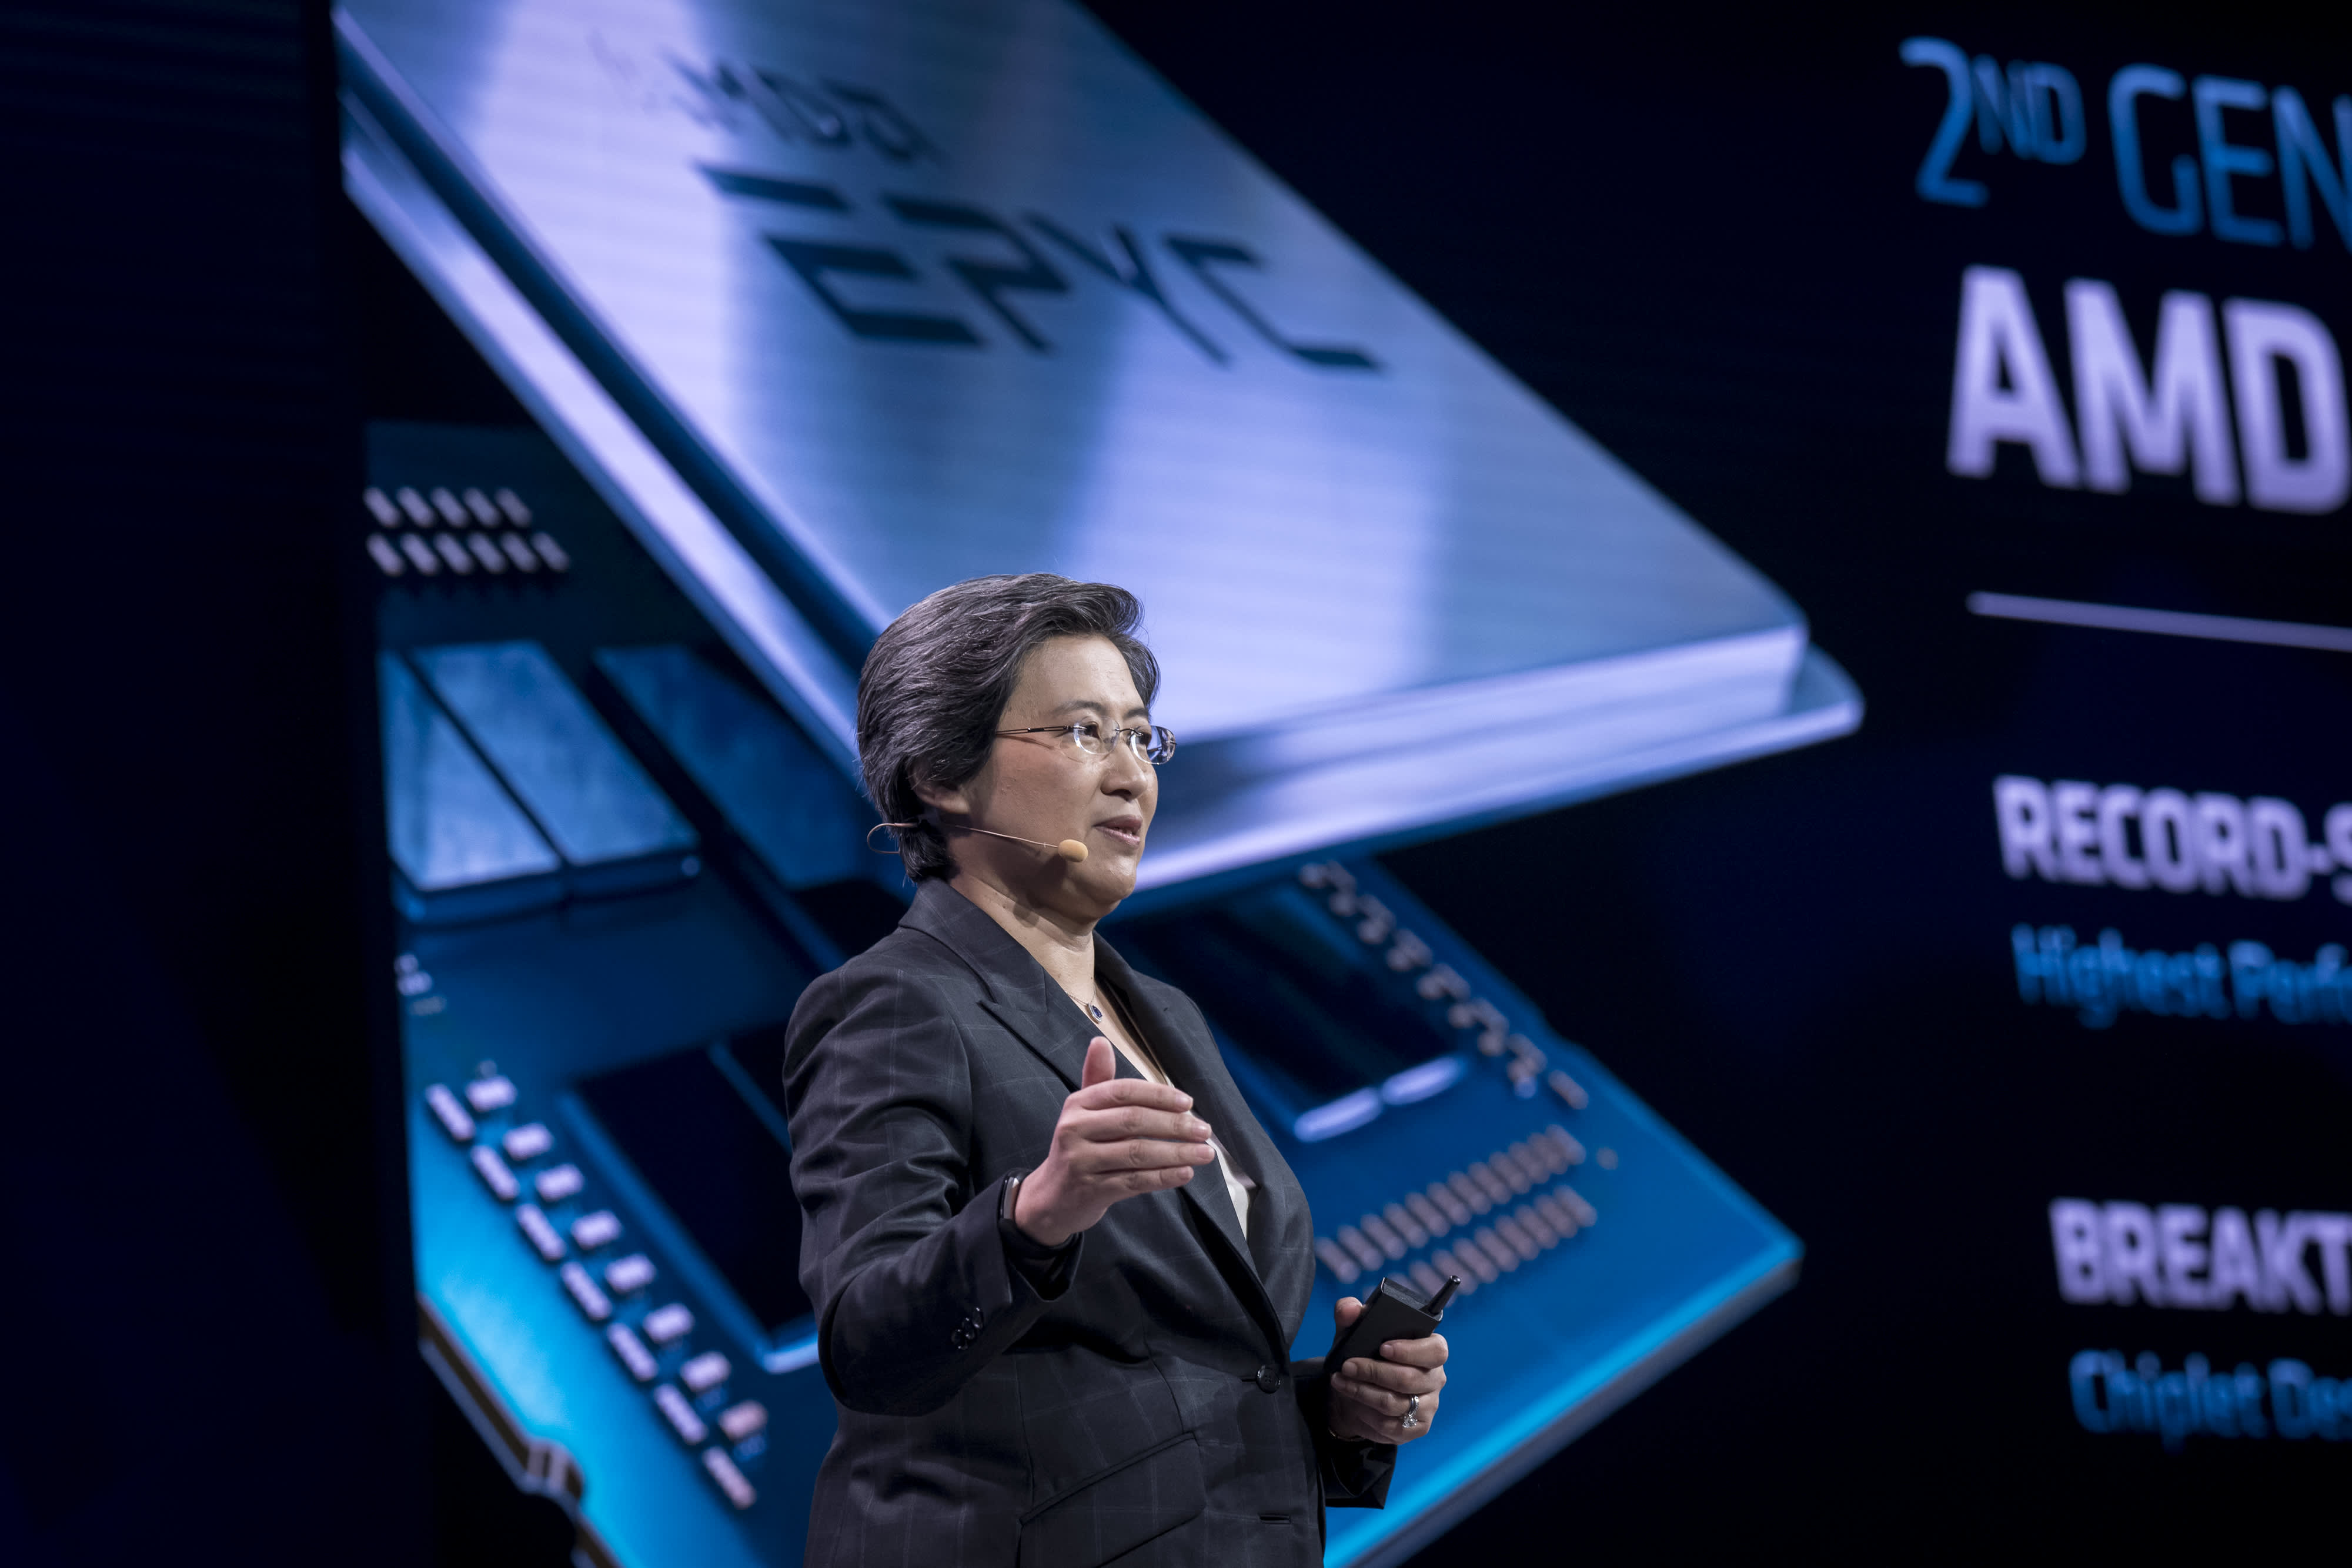 AMD catches two upgrades on Wall Street that may signal a bottom in the chip industry's slump